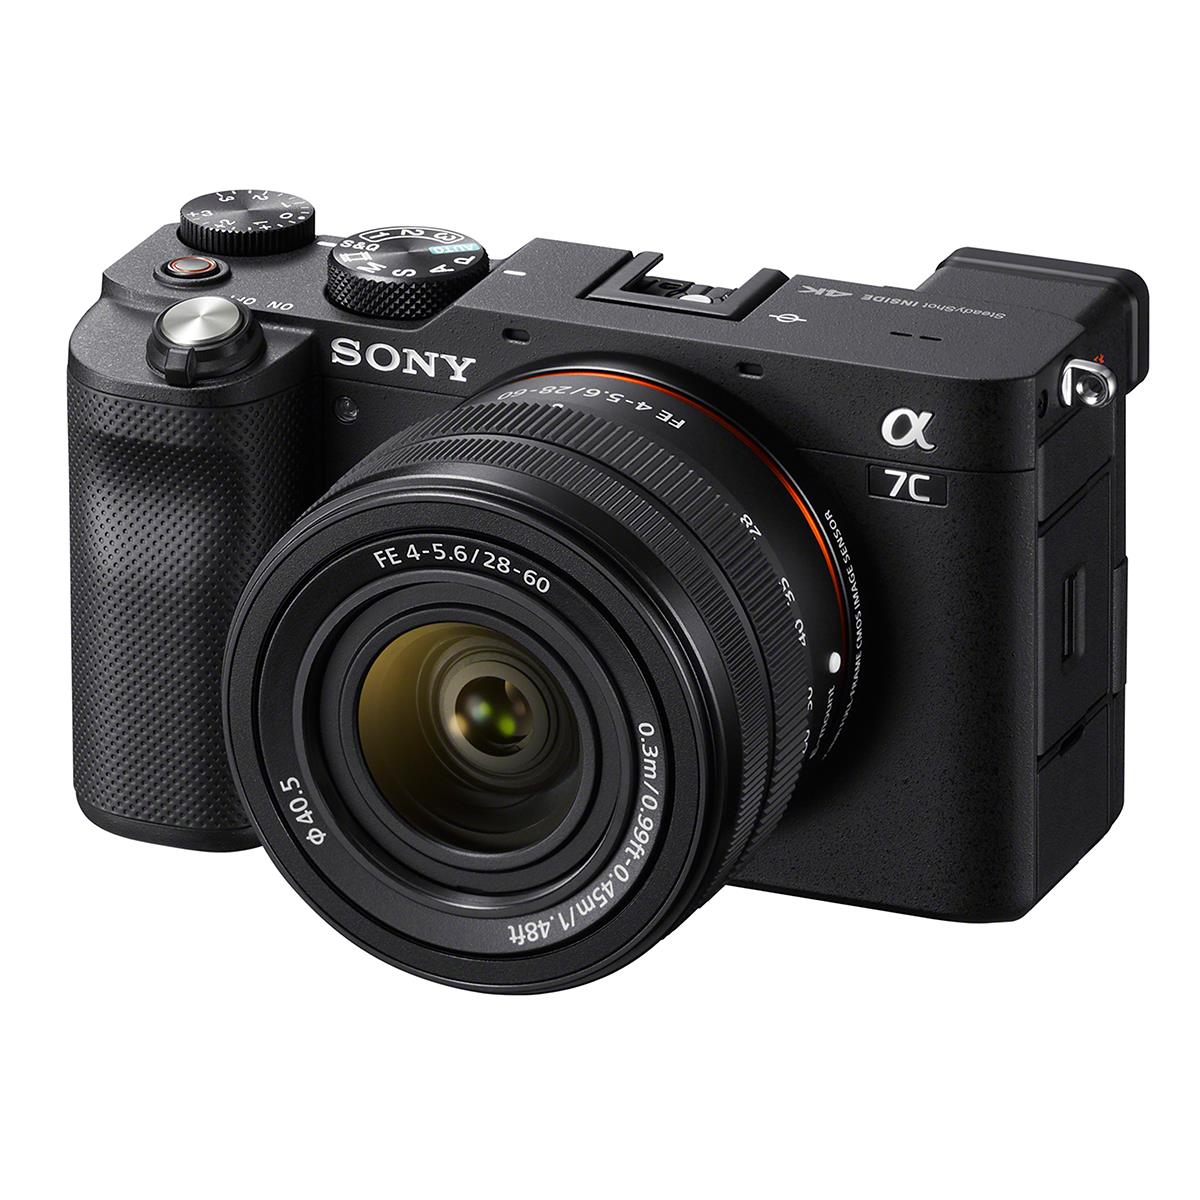 Image of Sony Alpha 7C Mirrorless Camera with FE 28-60mm f/4-5.6 Lens